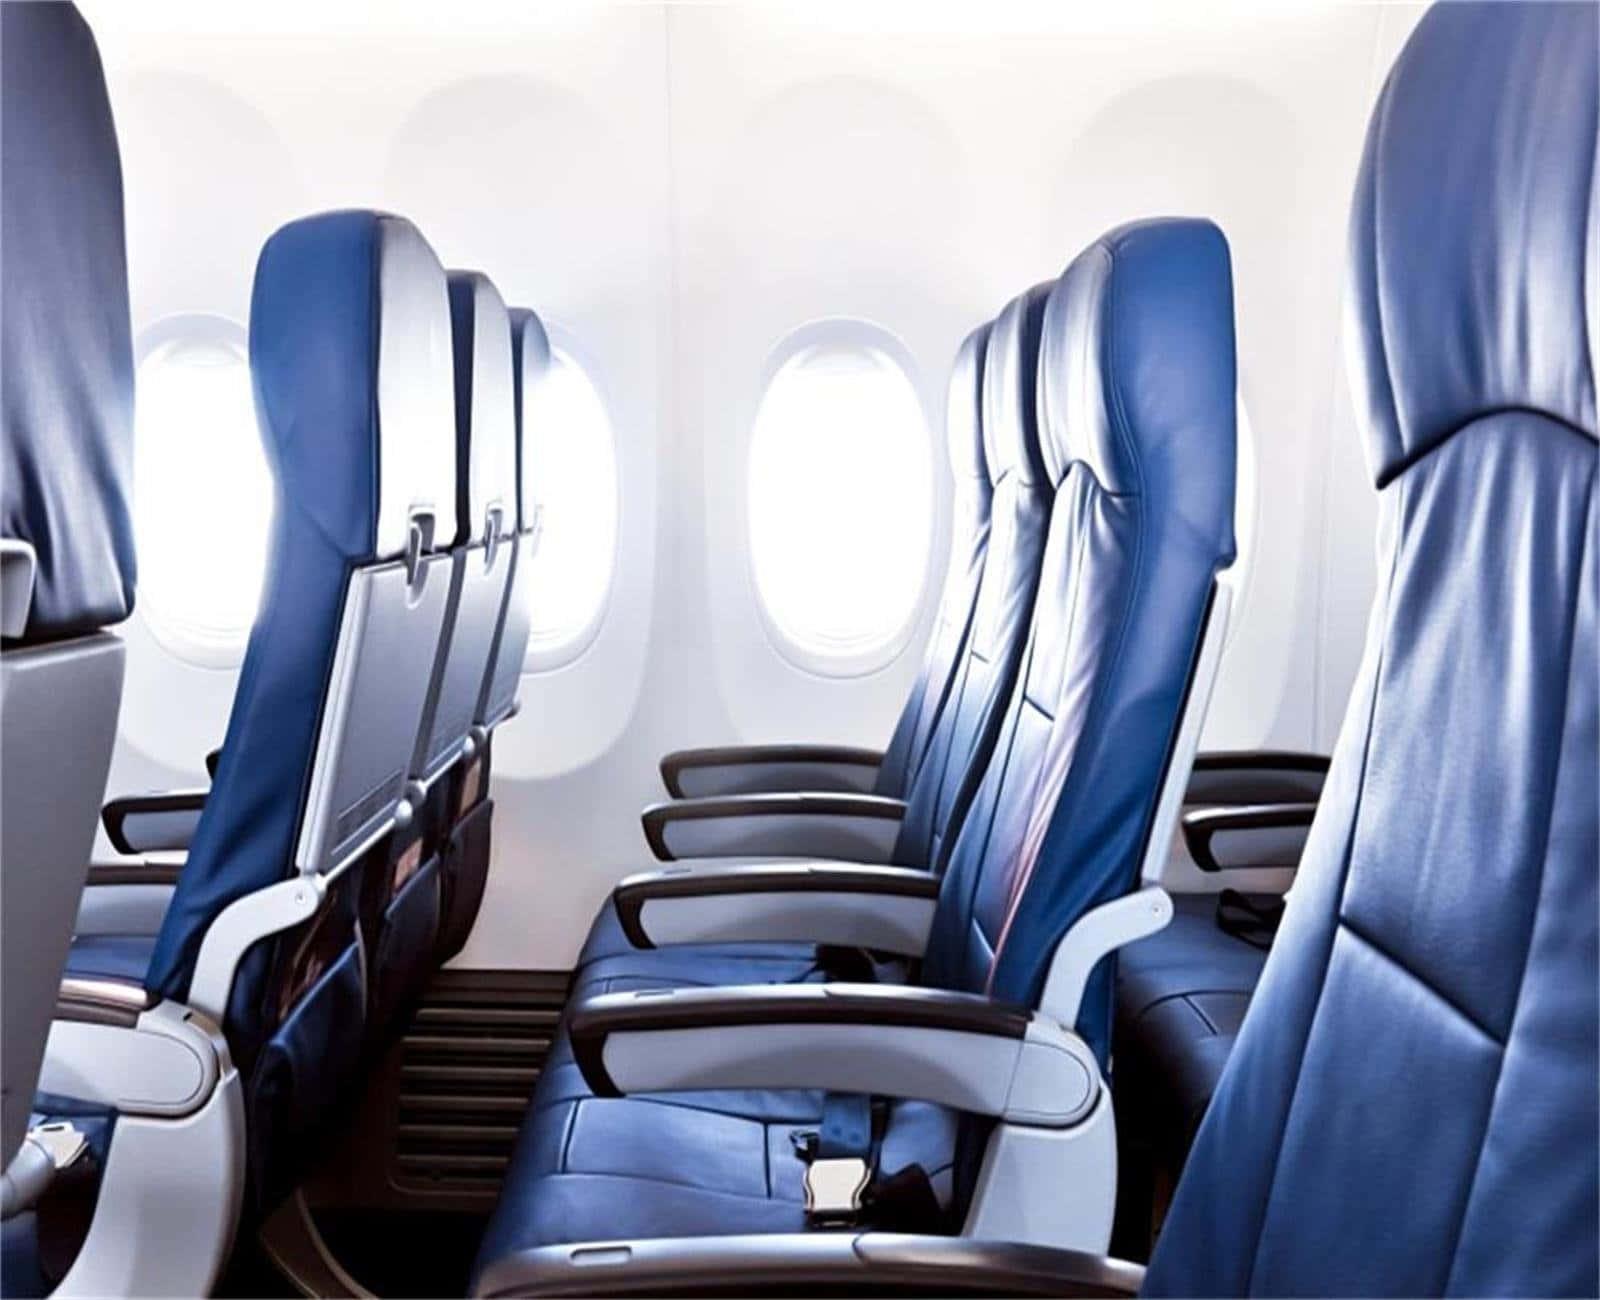 View of Economy Class Seating Inside an Airplane Wallpaper